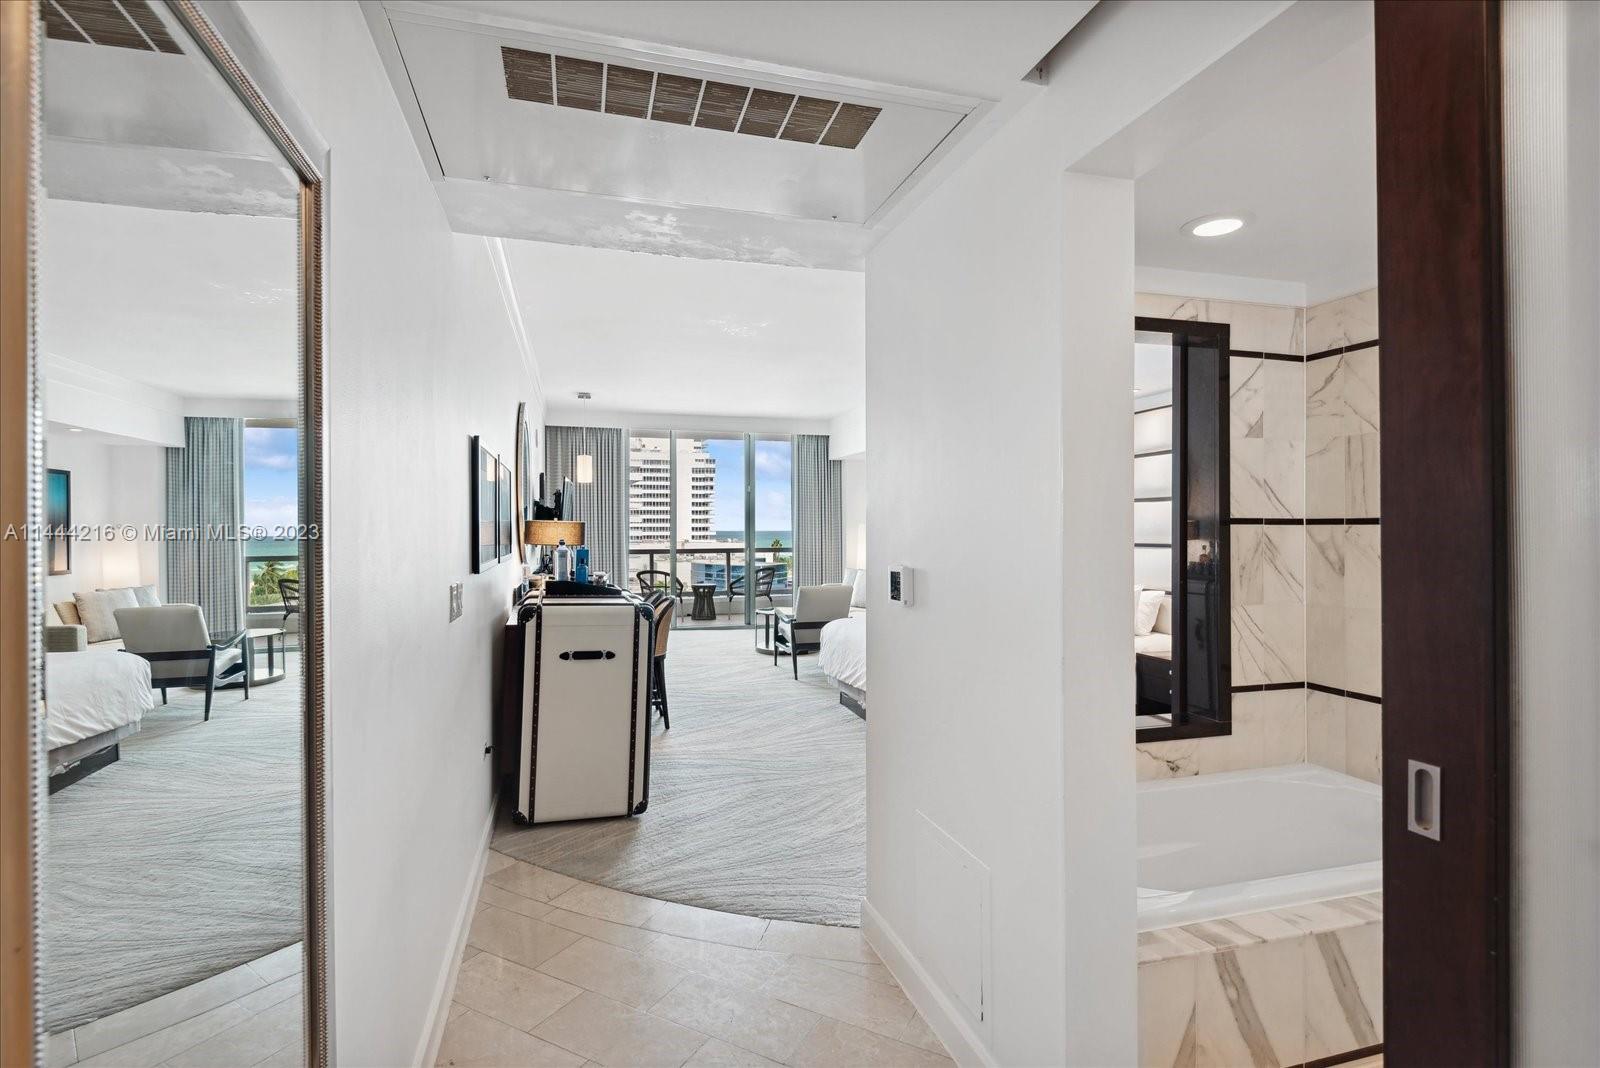 Photo 2 of Fontainebleau III Apt 504 in Miami Beach - MLS A11444216